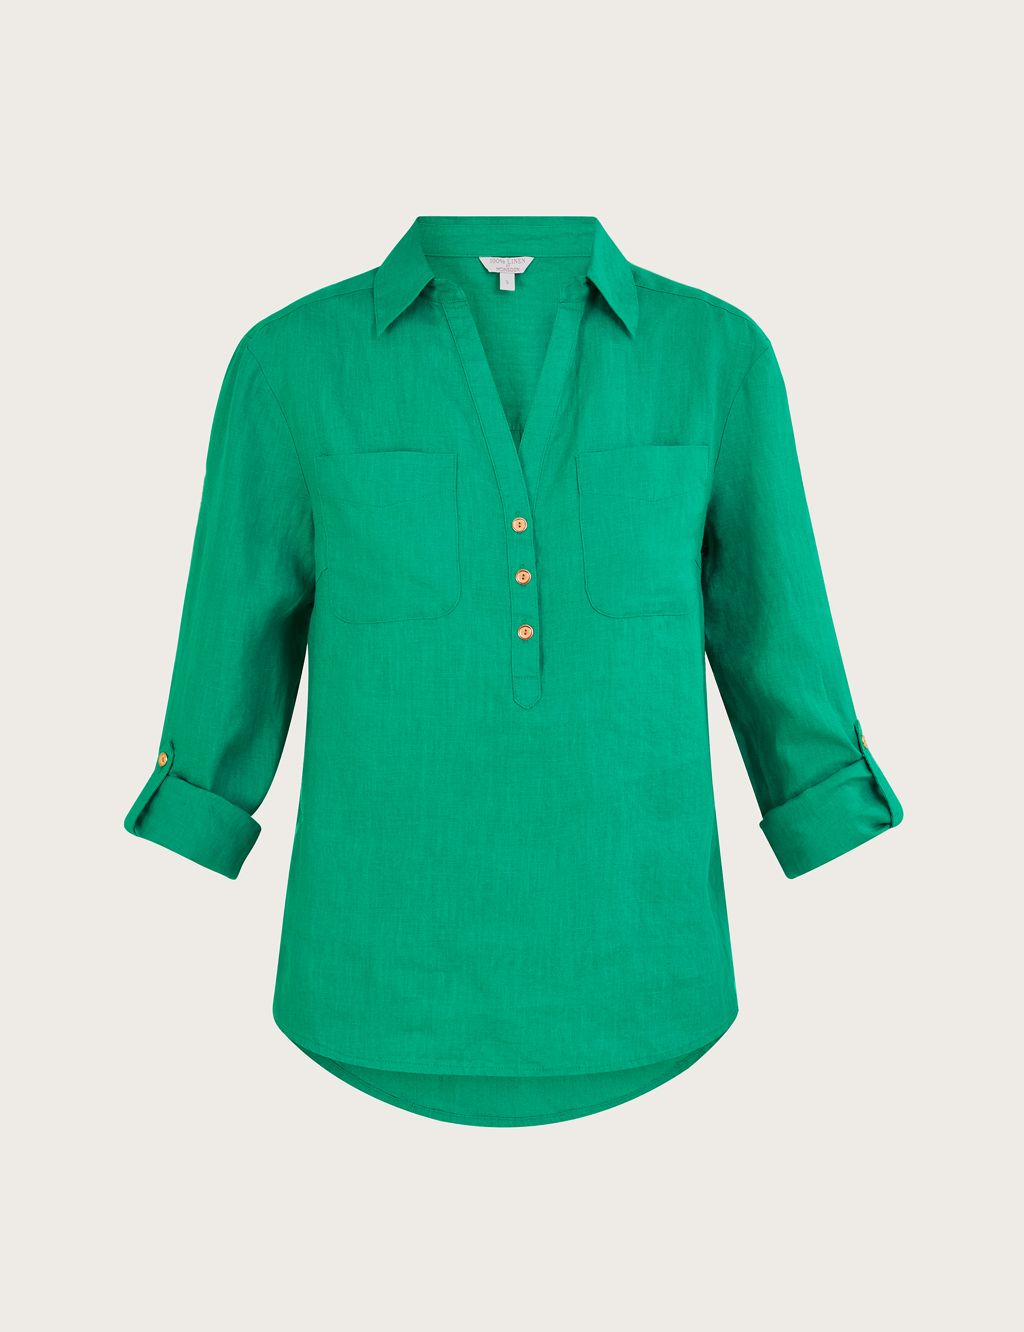 Pure Linen Collared Shirt image 2